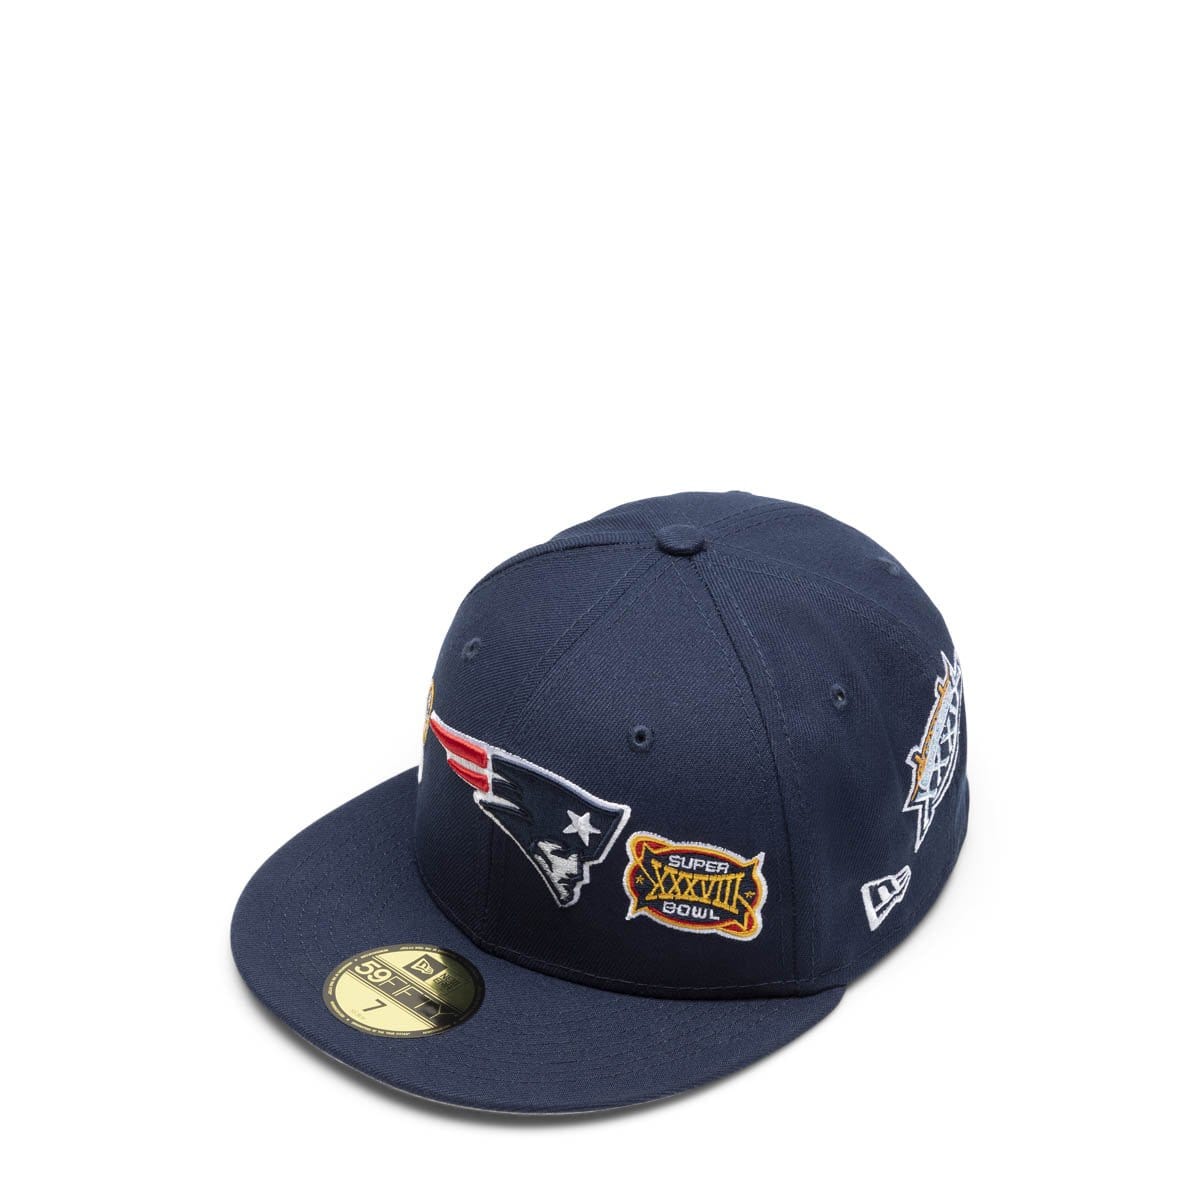 59FIFTY PATRIOTS COUNT THE RINGS FITTED CAP NAVY